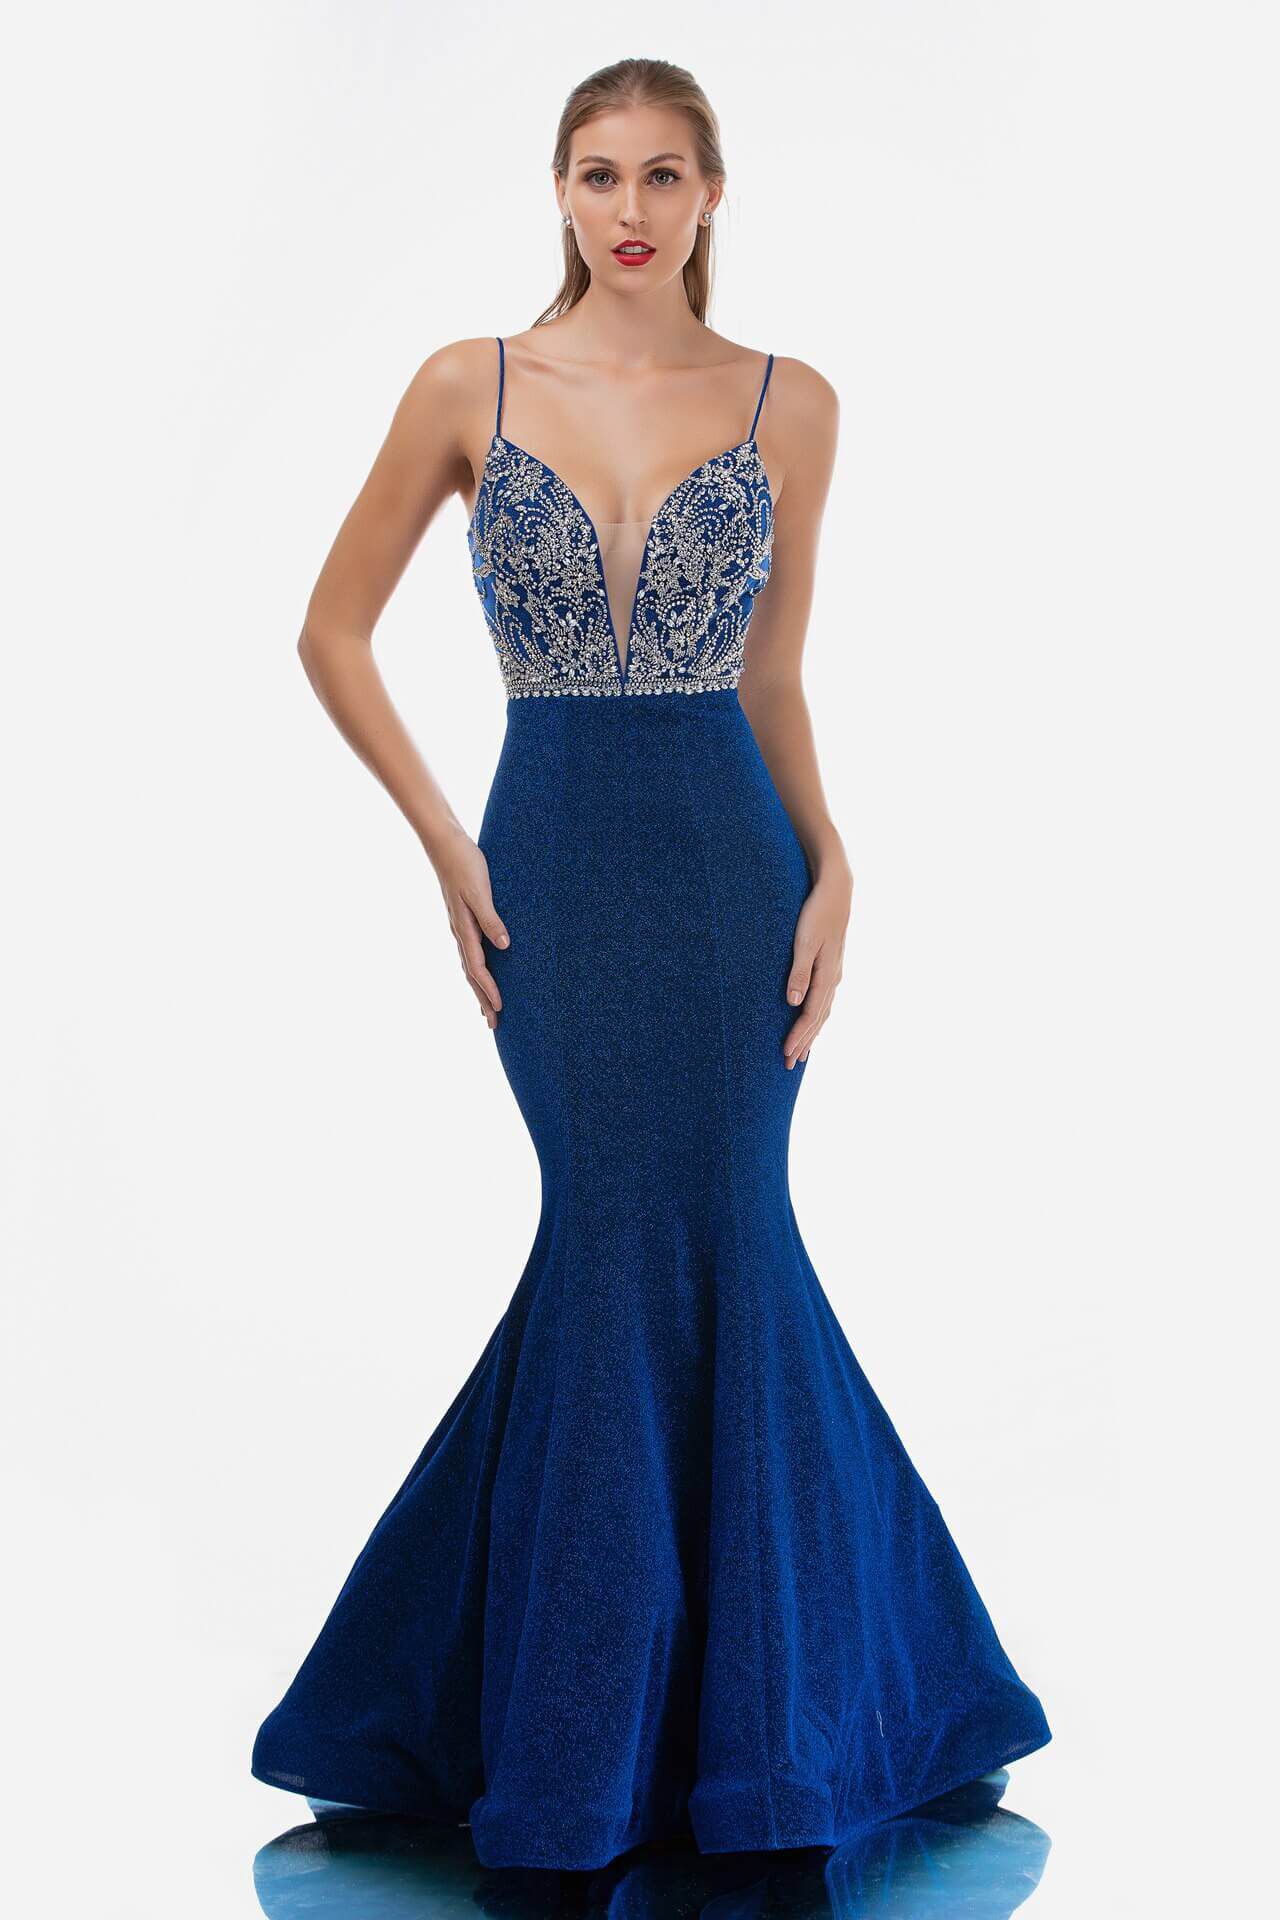 Style 3160 Nina Canacci Size 14 Prom Royal Blue Mermaid Dress on Queenly